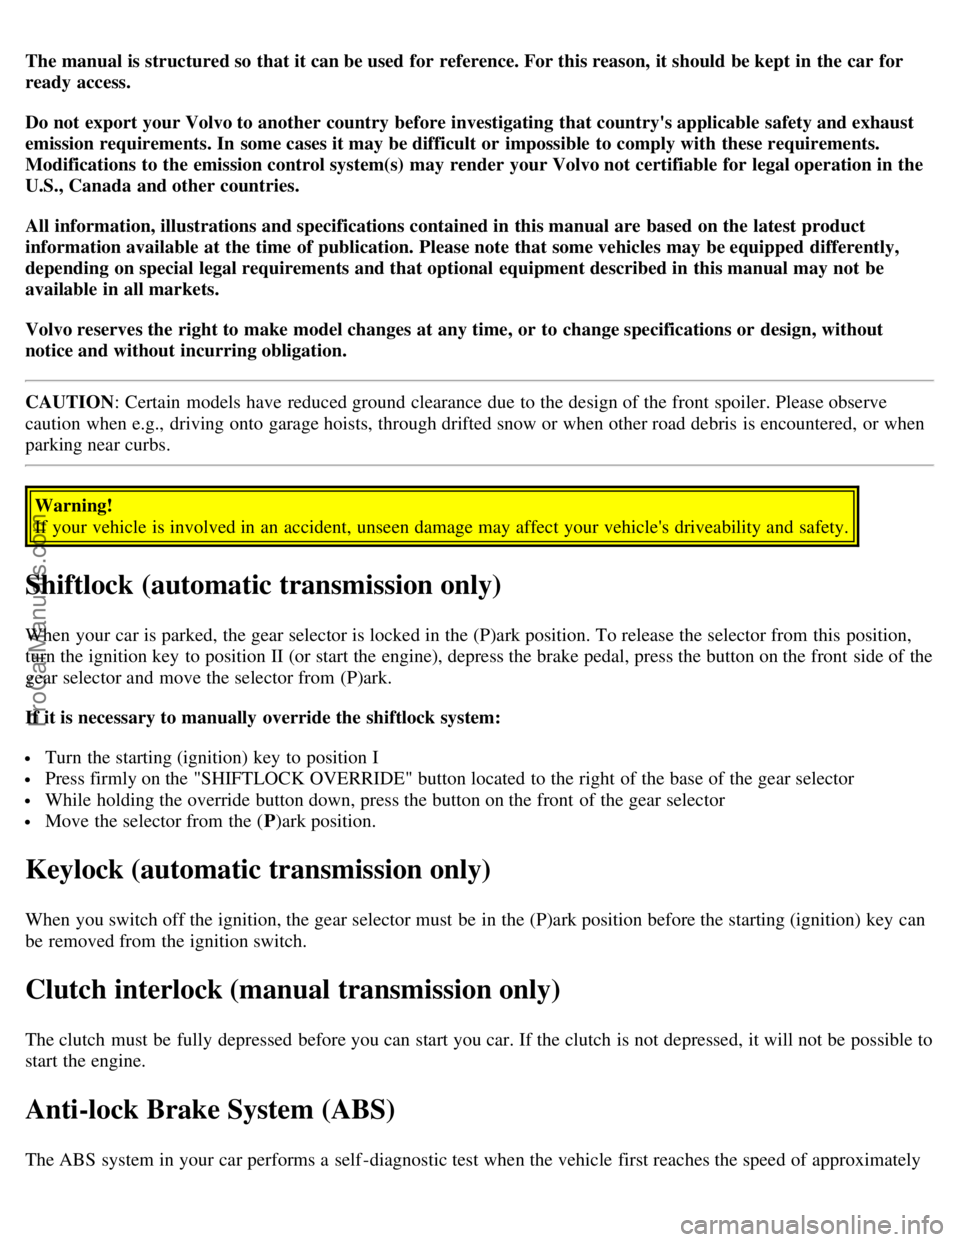 VOLVO C70 2004  Owners Manual The manual is structured so that it can be used  for reference. For this reason, it should be kept in the car for
ready  access.
Do not export your Volvo to another country before investigating  that 